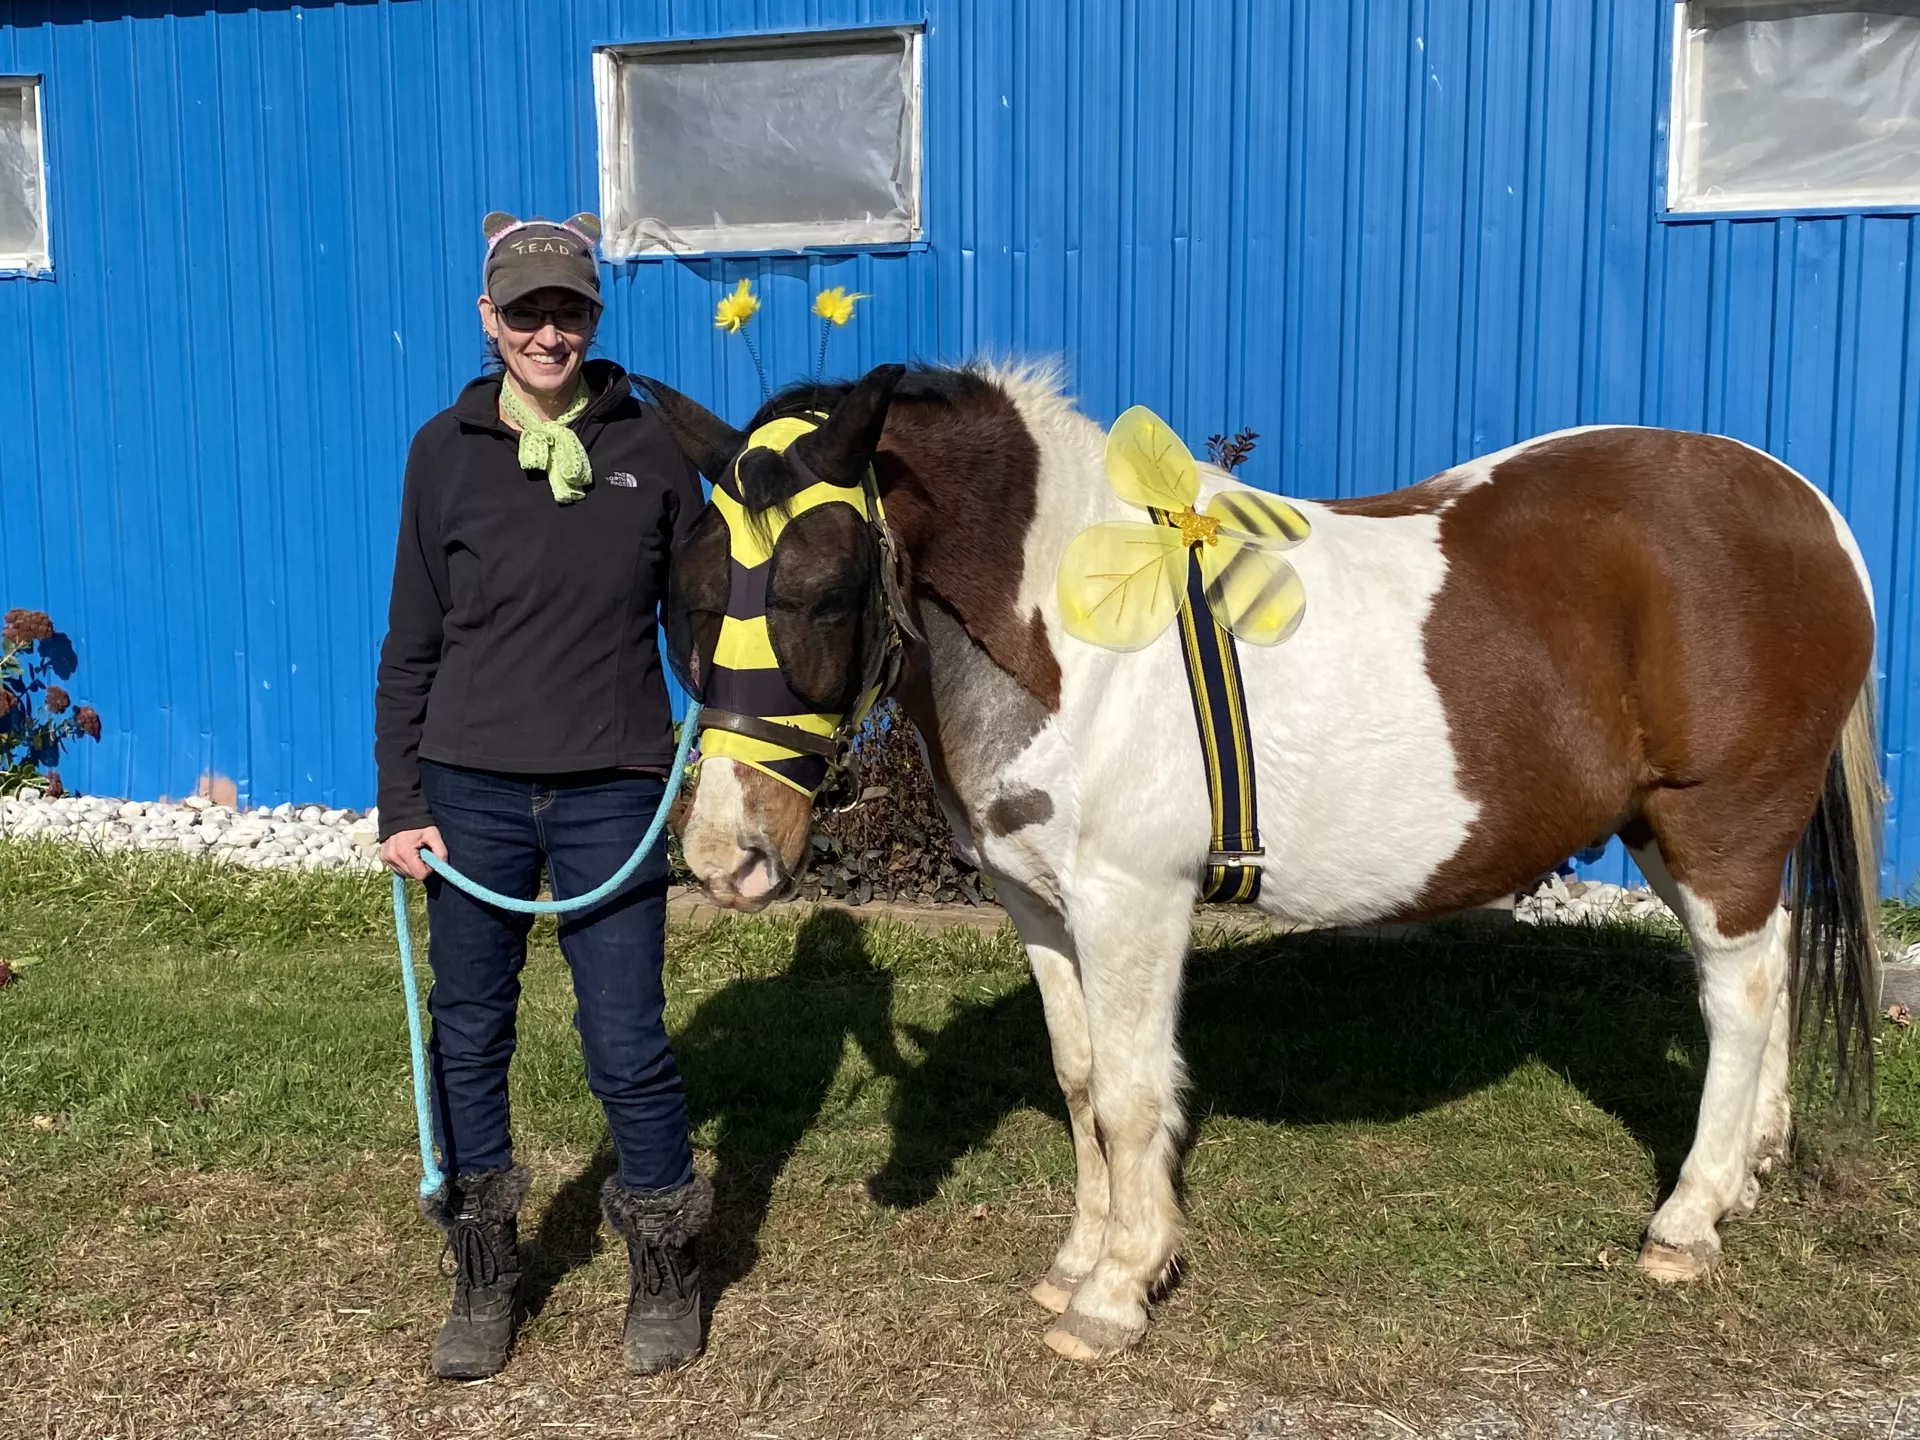 Rachael standing outside the barn with Wrangler, dressed as a bumblebee